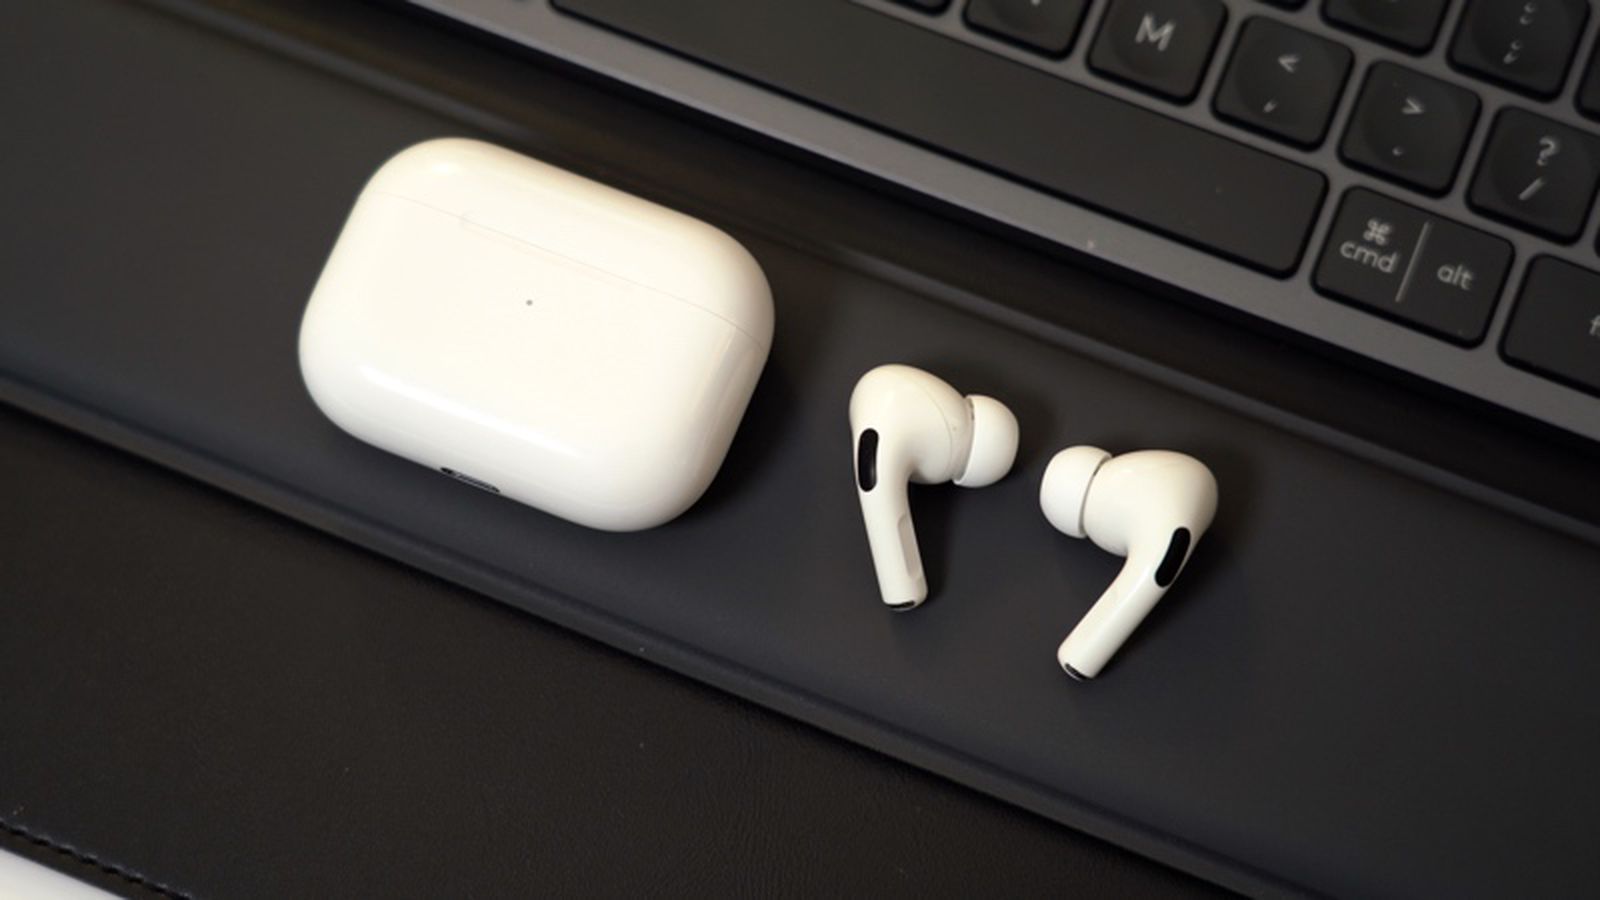 Kuo: AirPods, MagSafe Battery Pack, and Other Apple Accessories Also to Switch to USB-C in Future - MacRumors